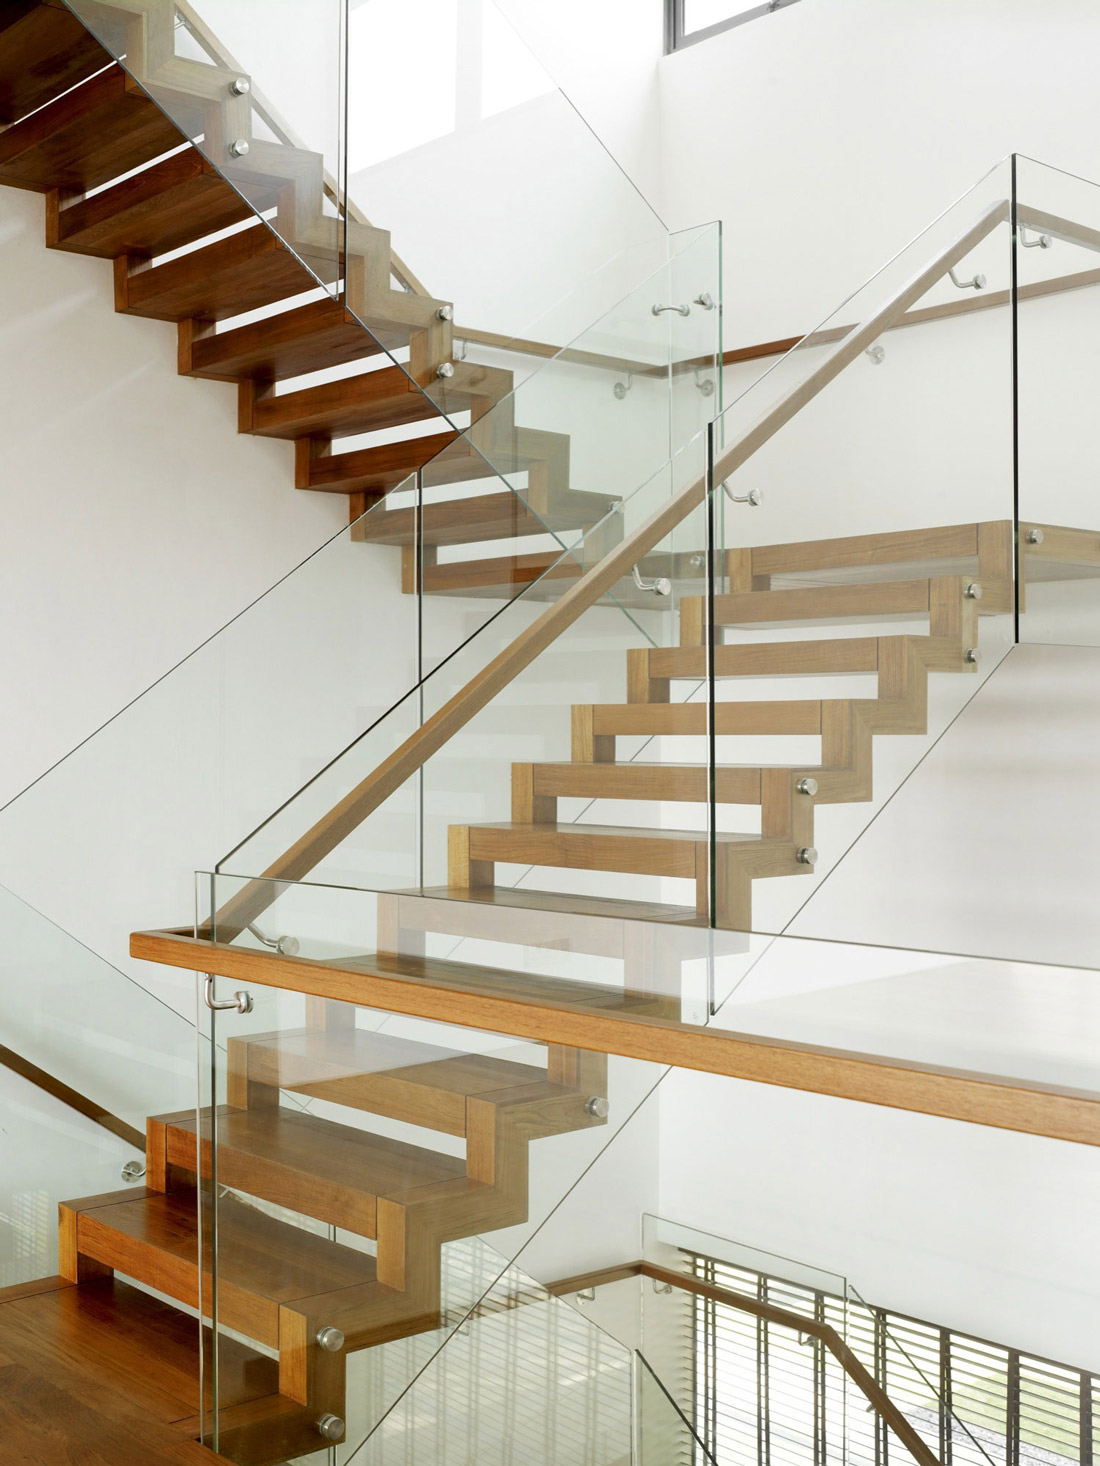 Glass & Wood Stairs, Minimalist Contemporary Home in Singapore